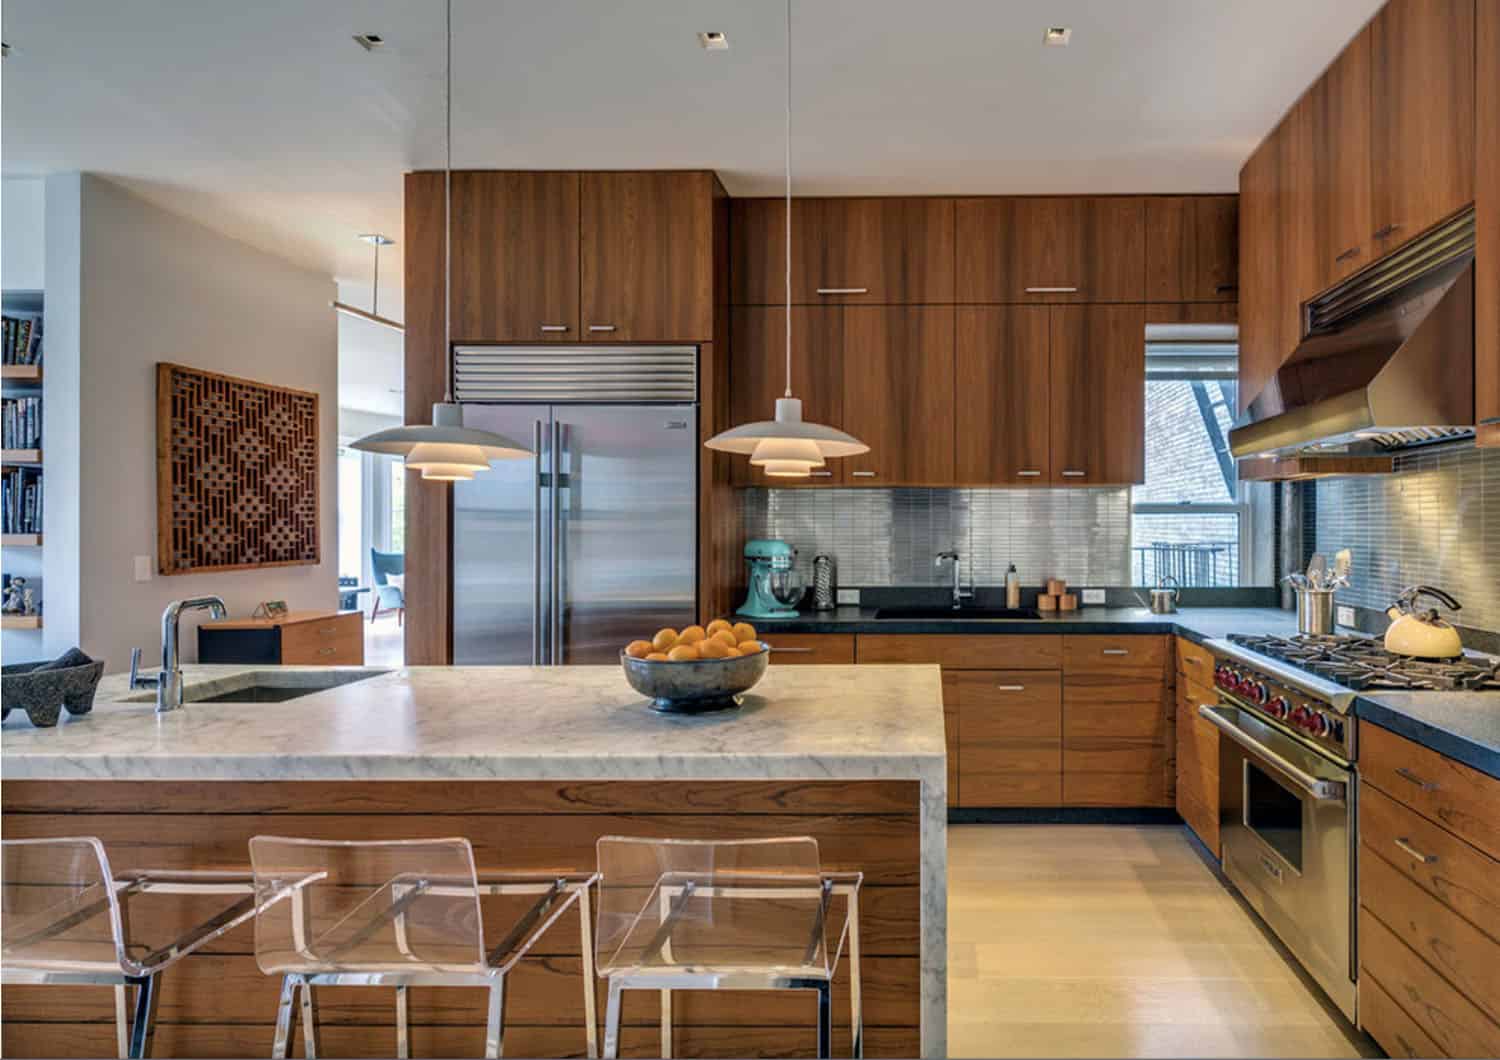 18 Incredible Midcentury Modern Kitchens to Delight the Senses